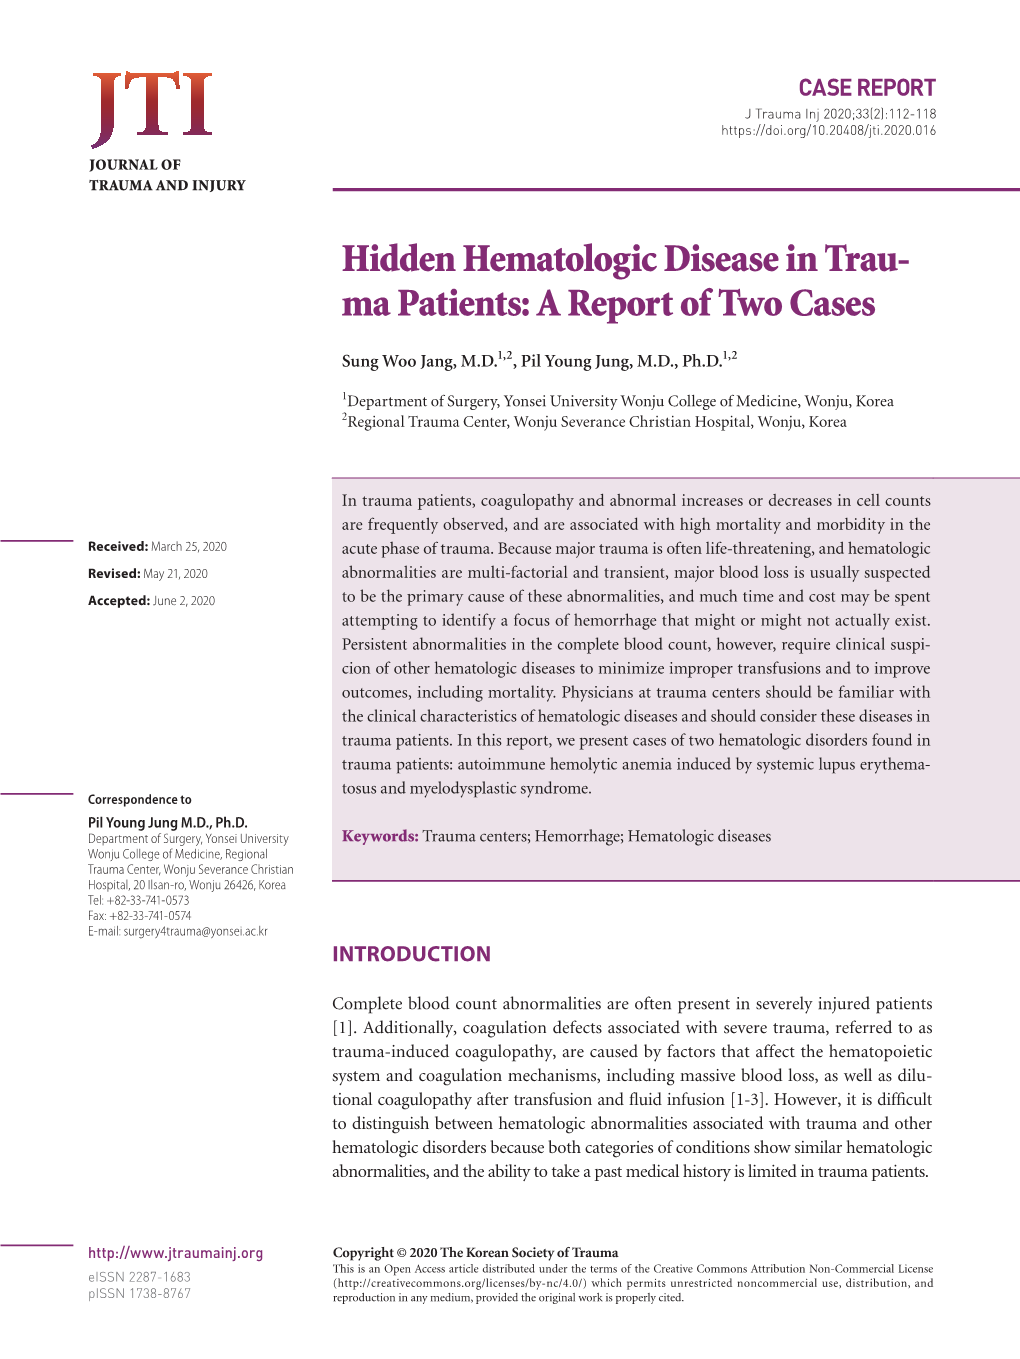 Hidden Hematologic Disease in Trau- Ma Patients: a Report of Two Cases